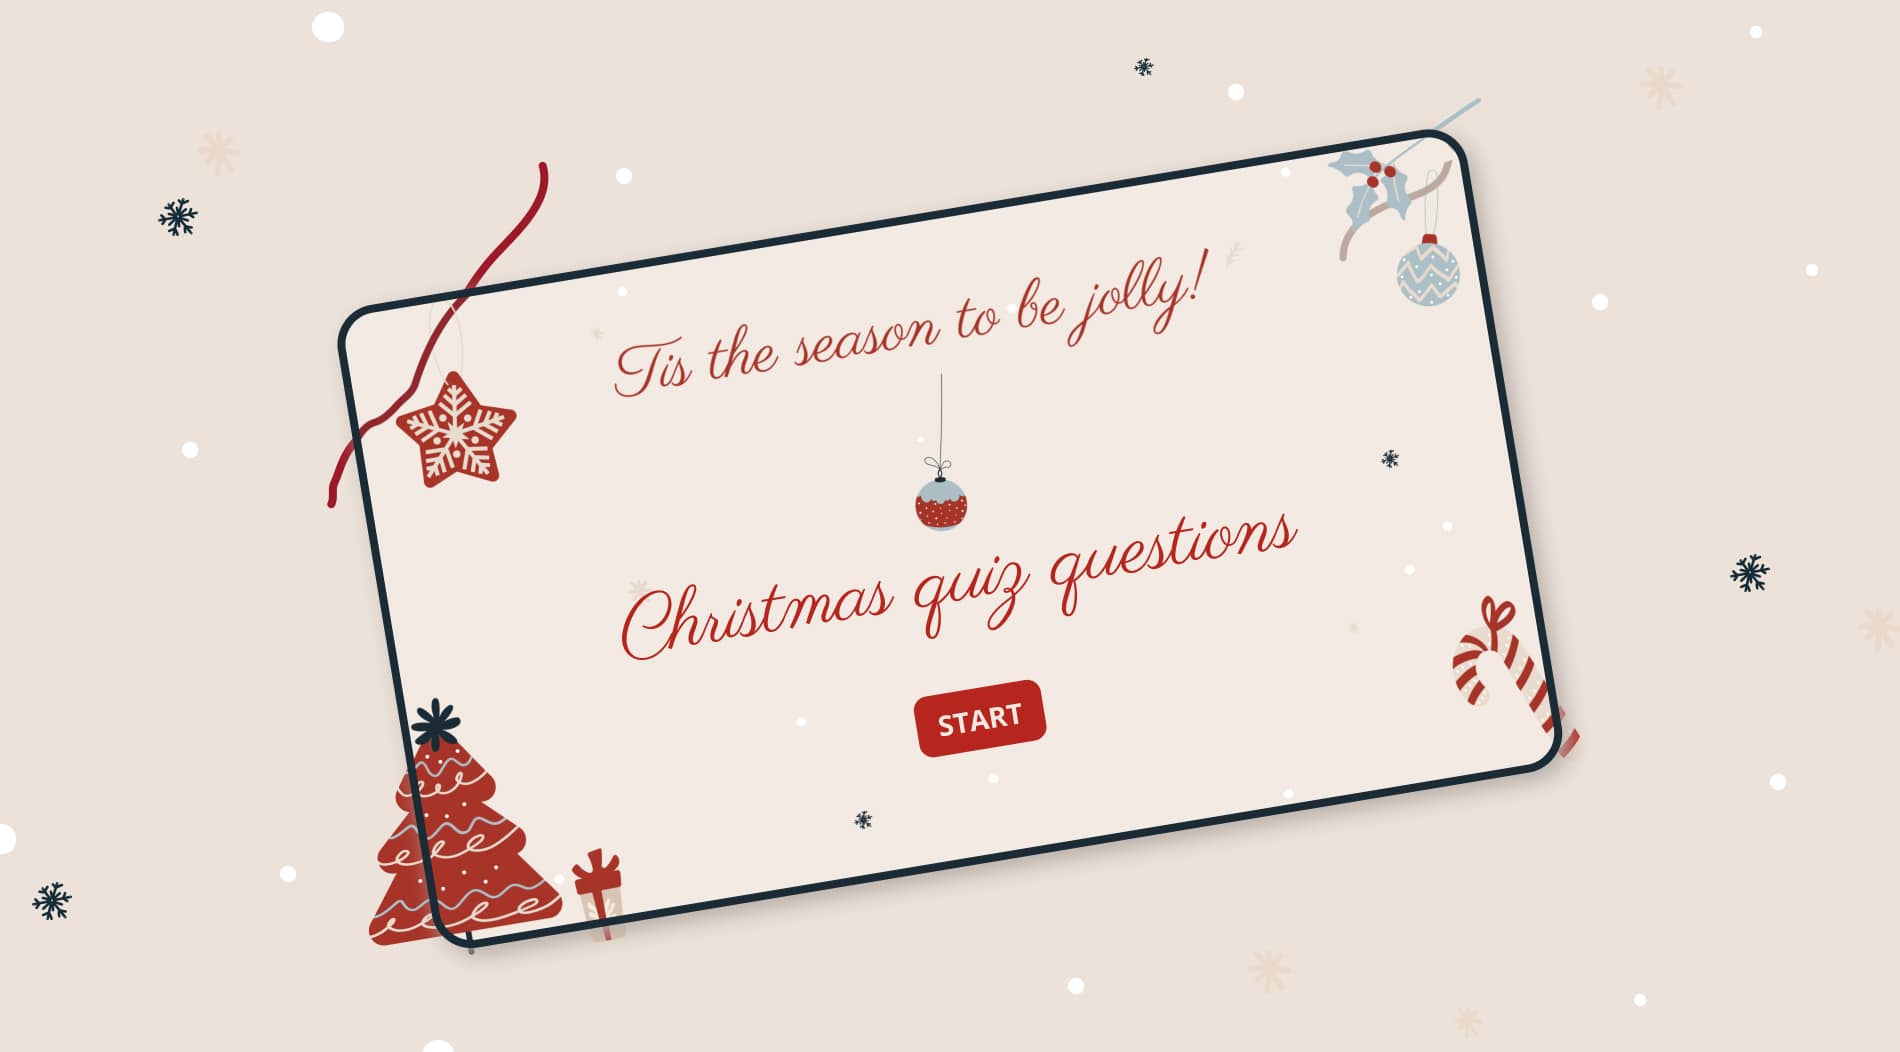 75 Christmas quiz questions & answers